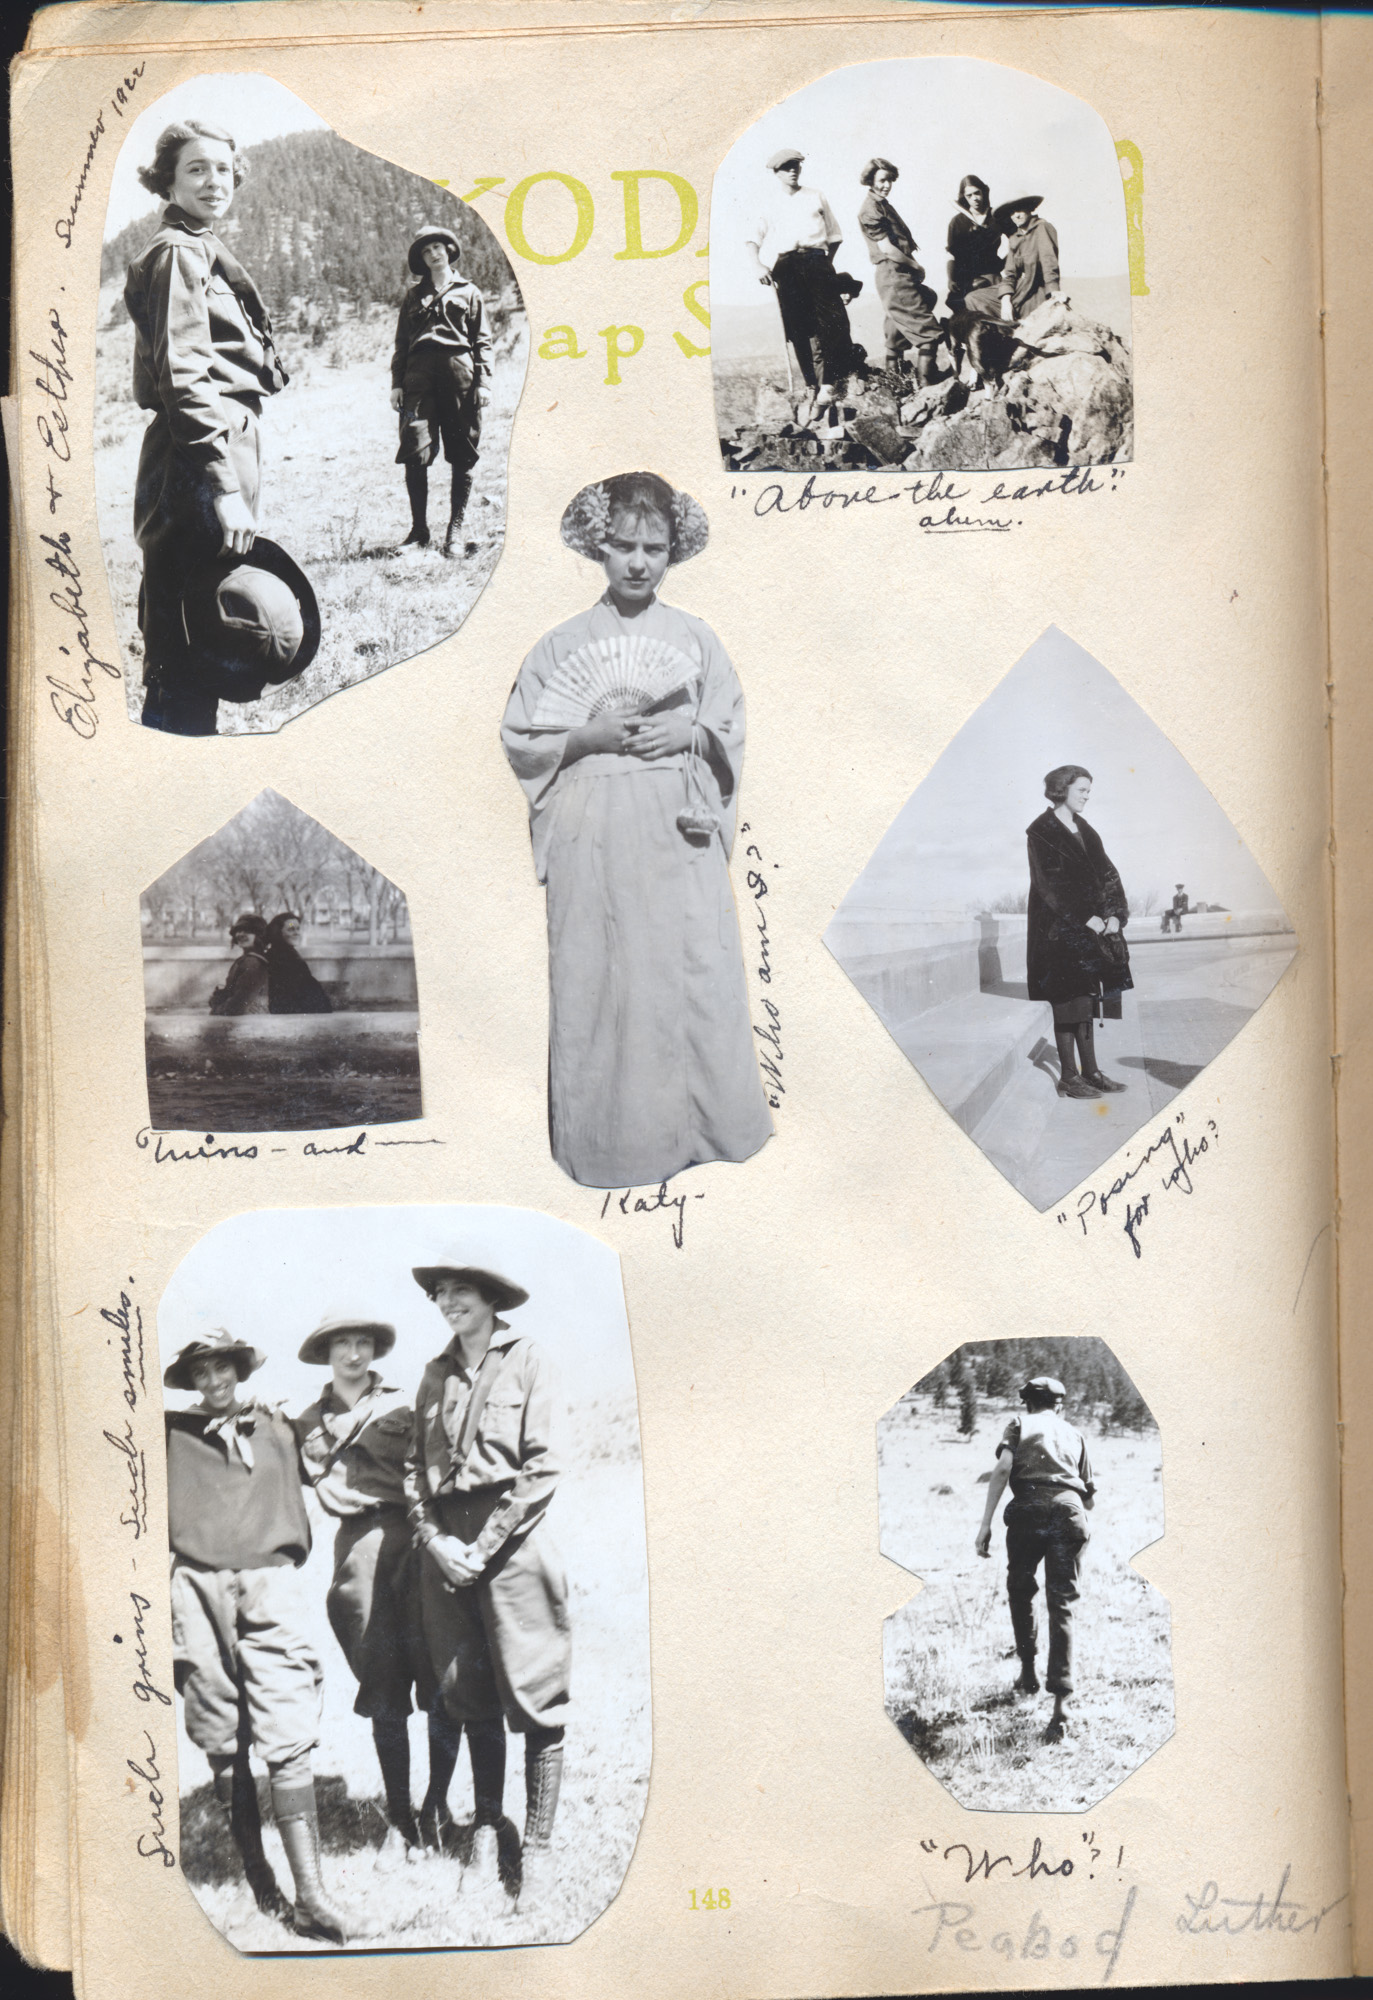 Dauth Family Archive - Circa 1920-1924 - Elizabeth Dauth's Memory Book - Page 148 - Photo